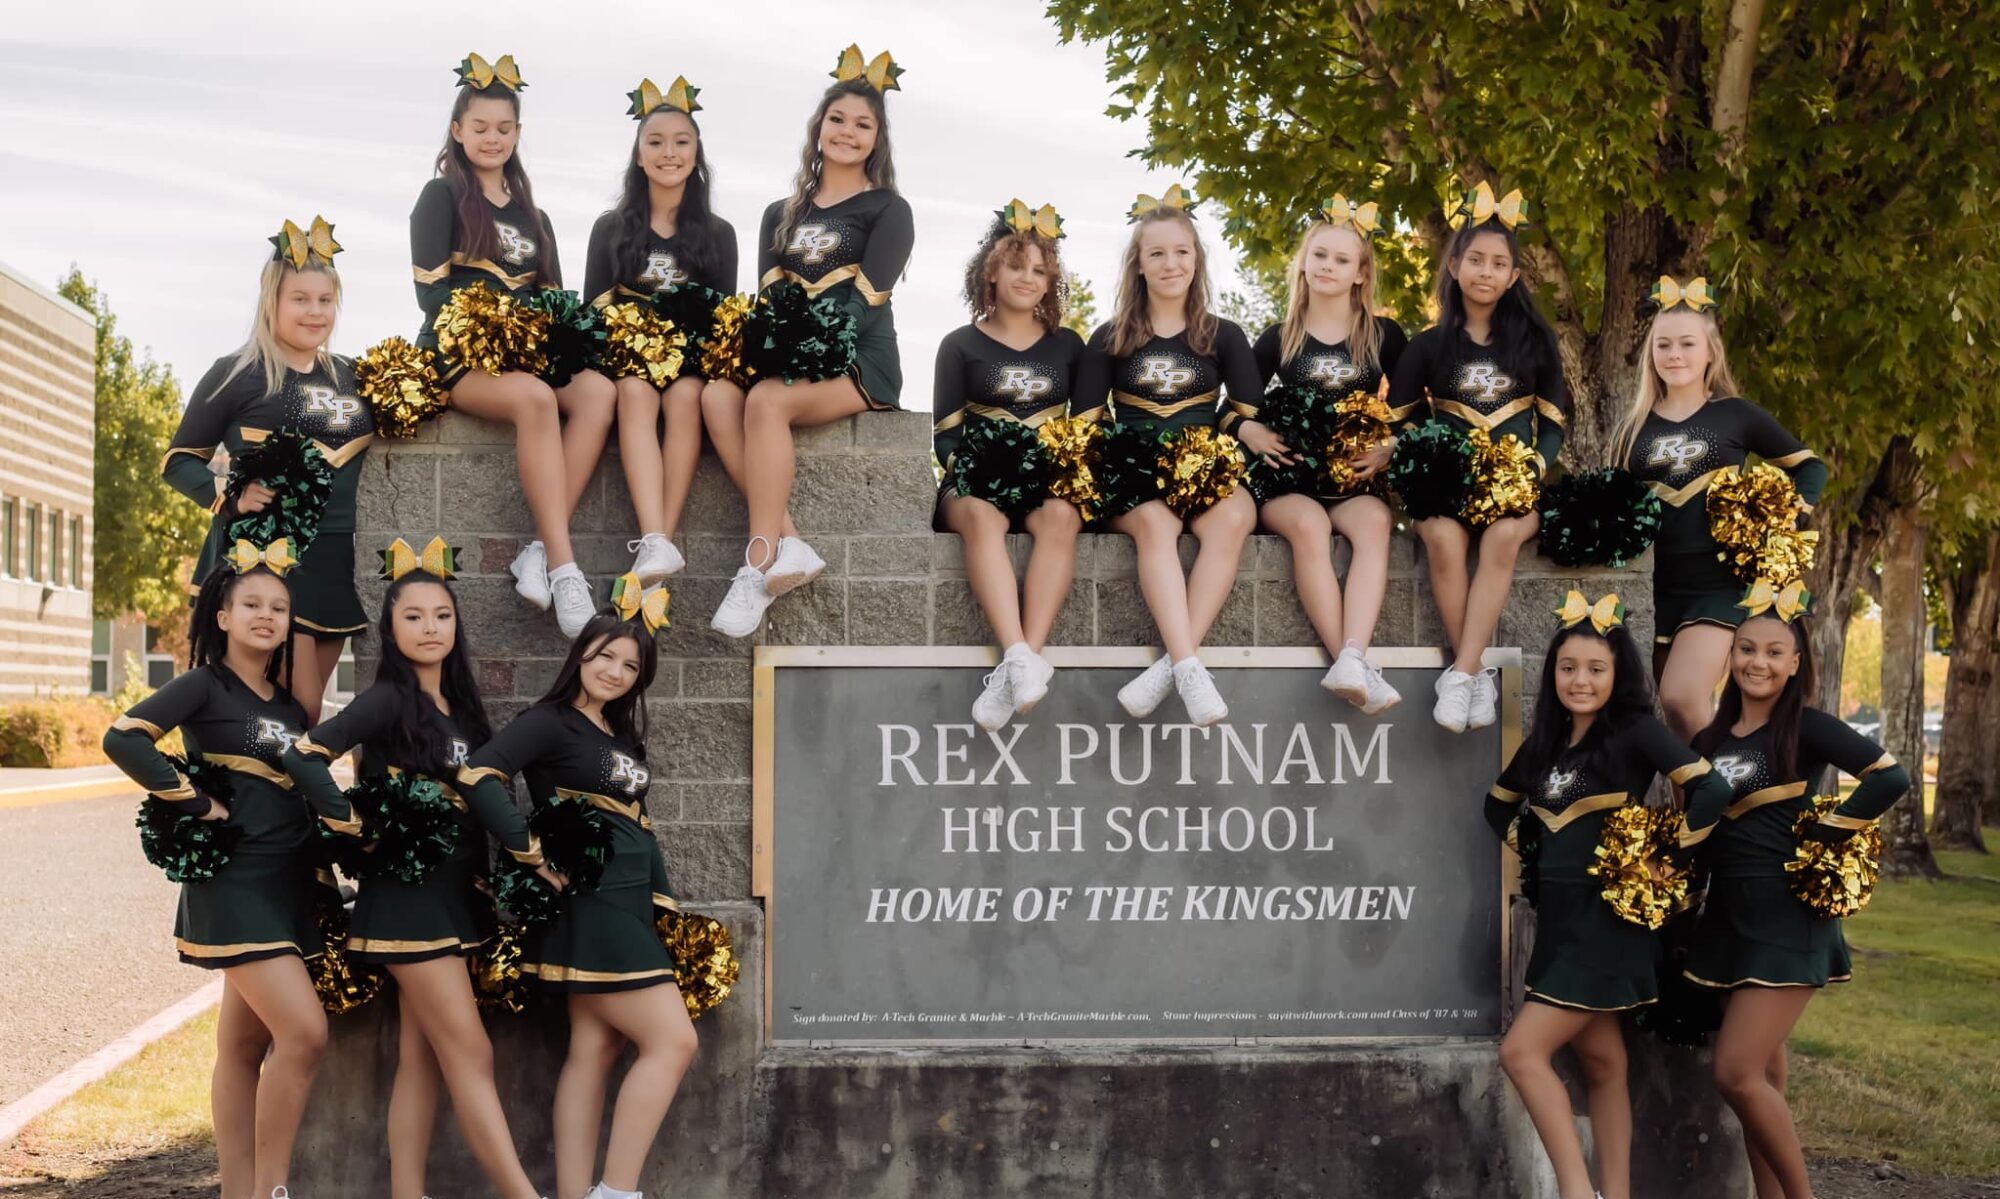 The RPYC team sits on the entrance sign to Rex Putnam.